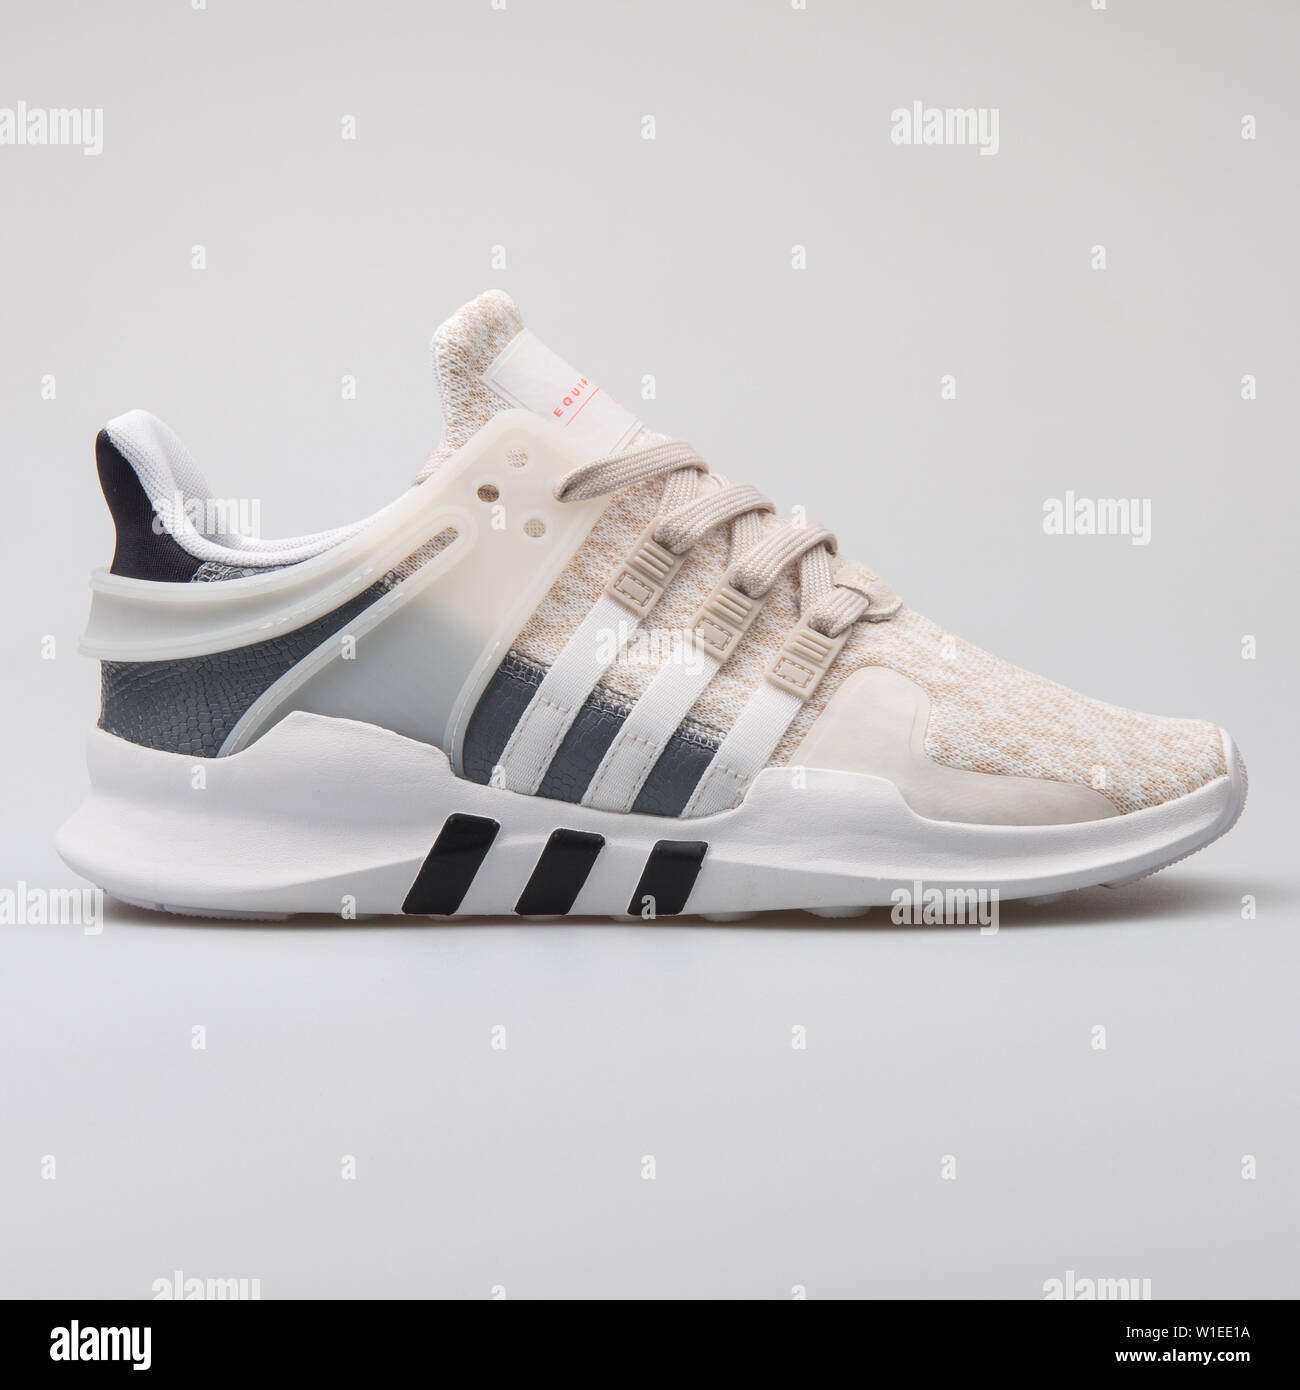 VIENNA, AUSTRIA - AUGUST 7, 2017: Adidas Support ADV grey and sneaker on white Stock Photo - Alamy